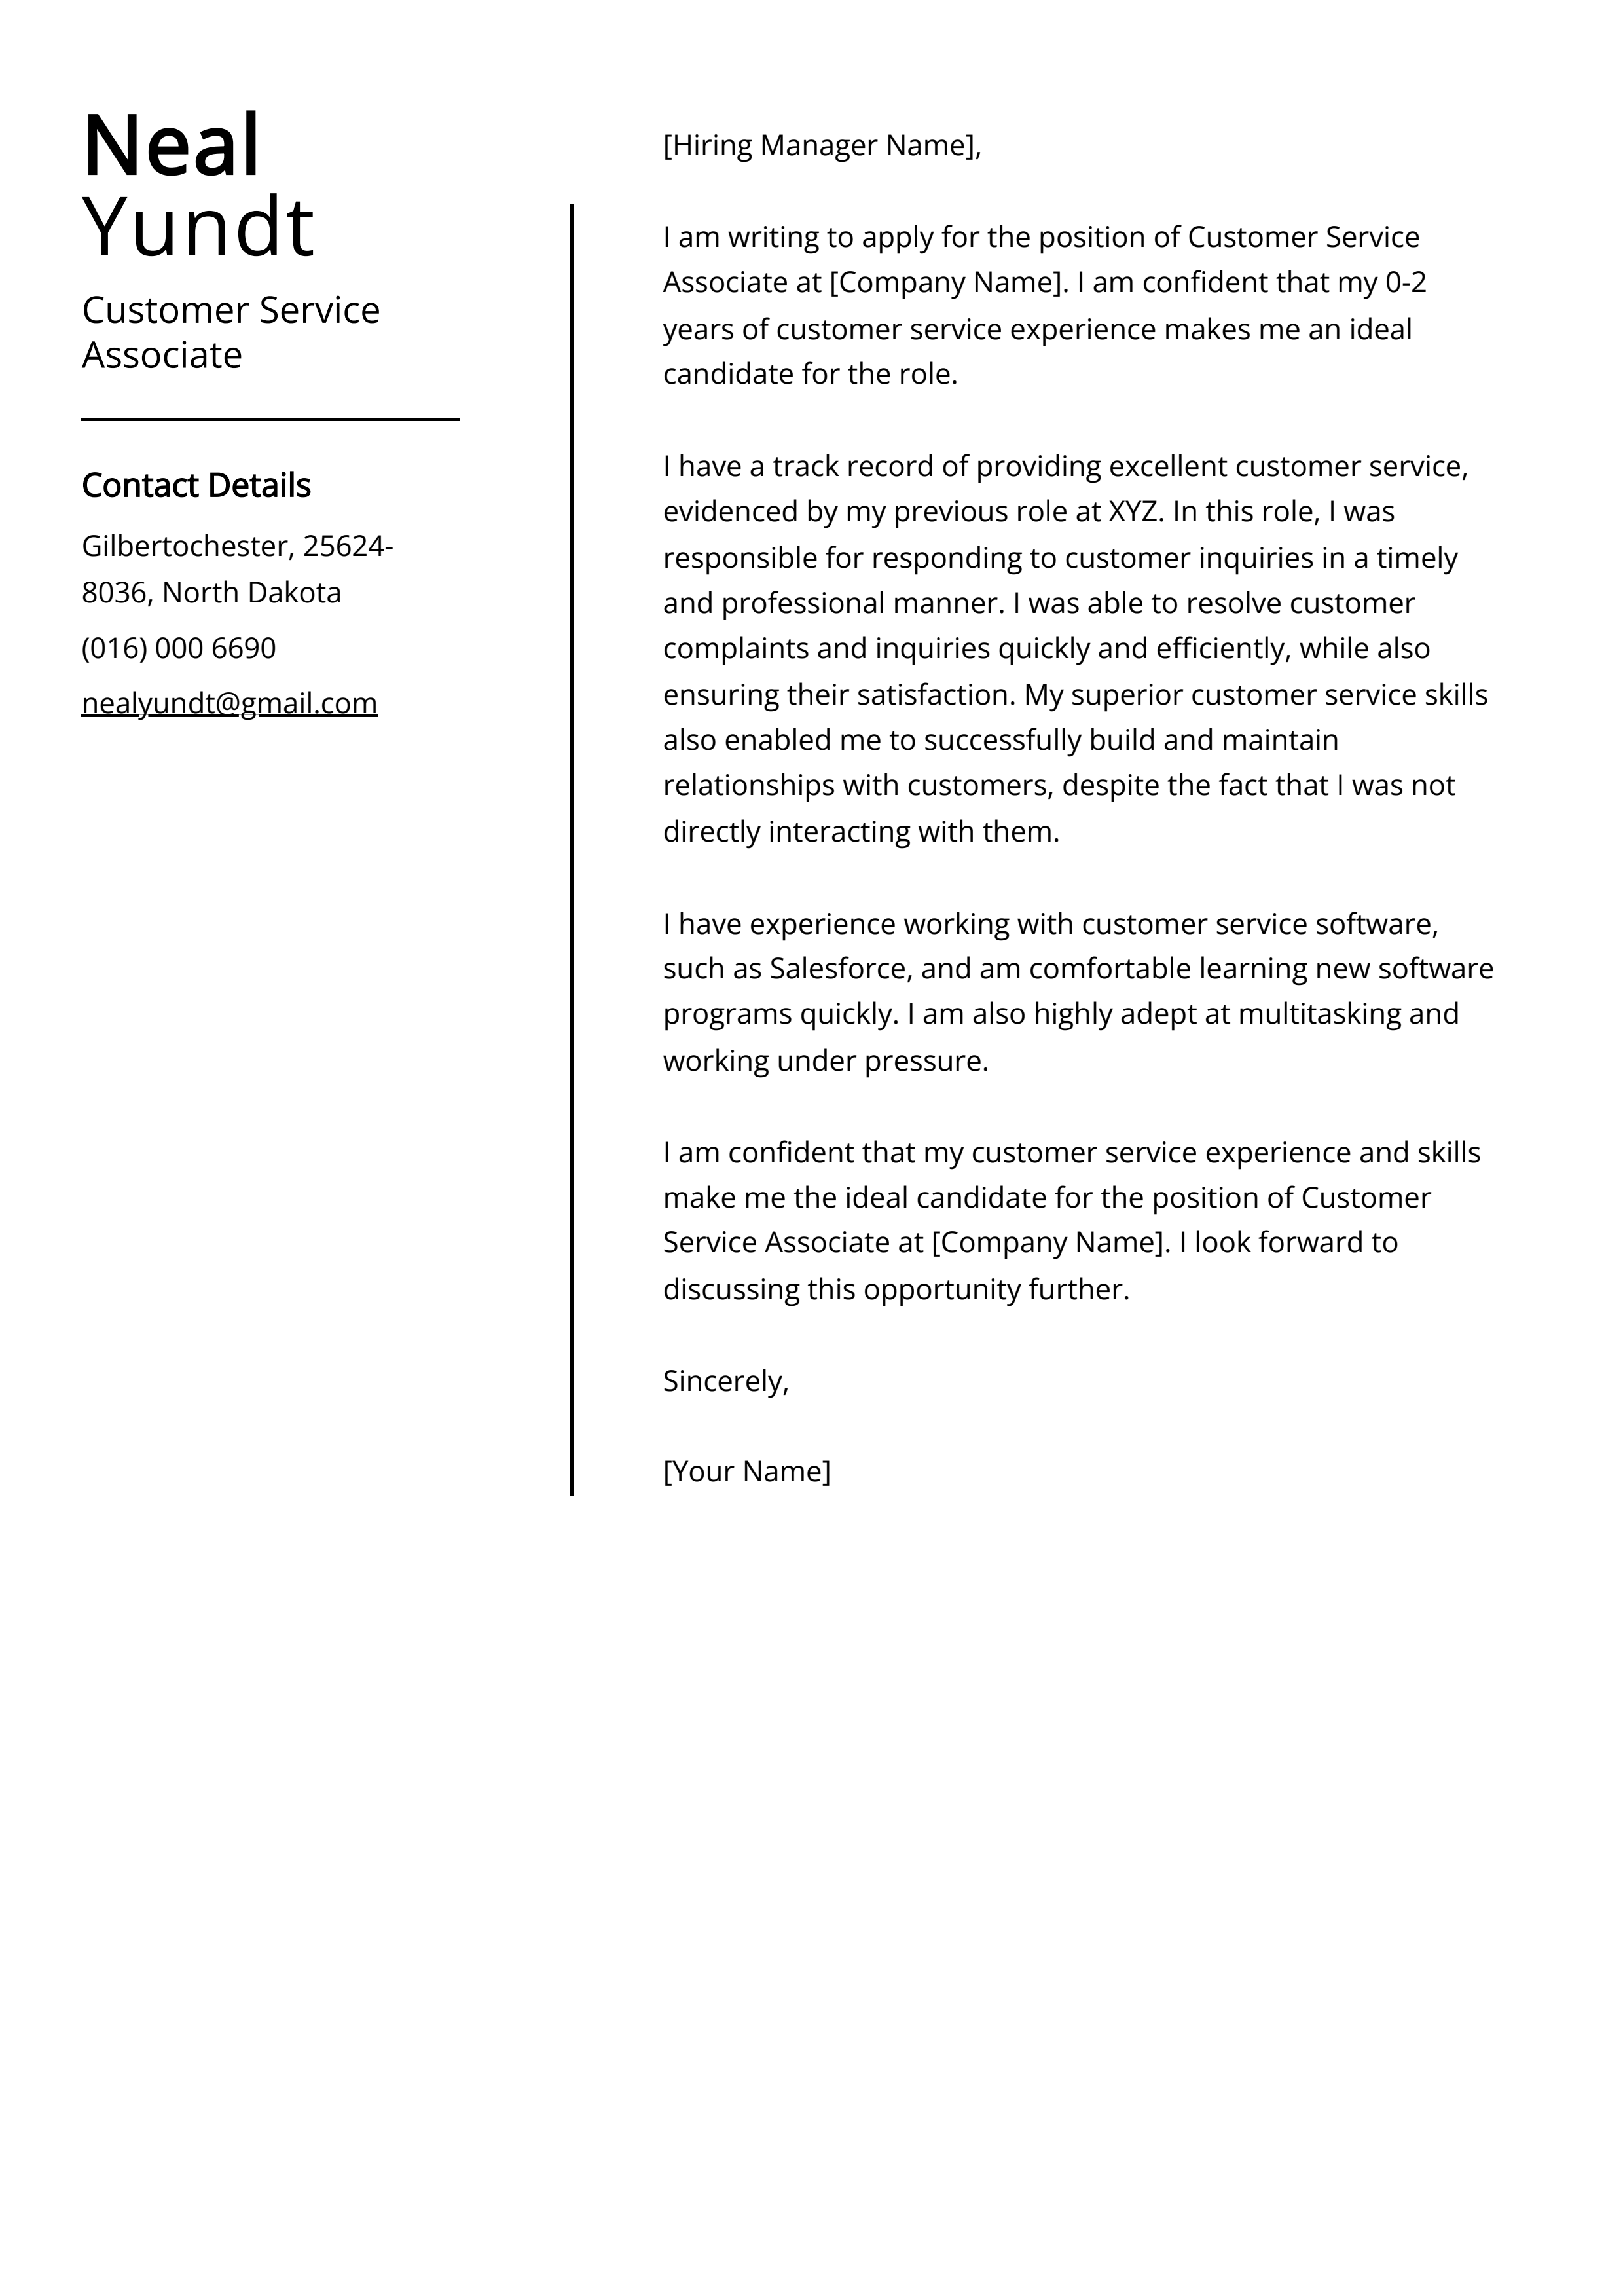 Customer Service Associate Cover Letter Example